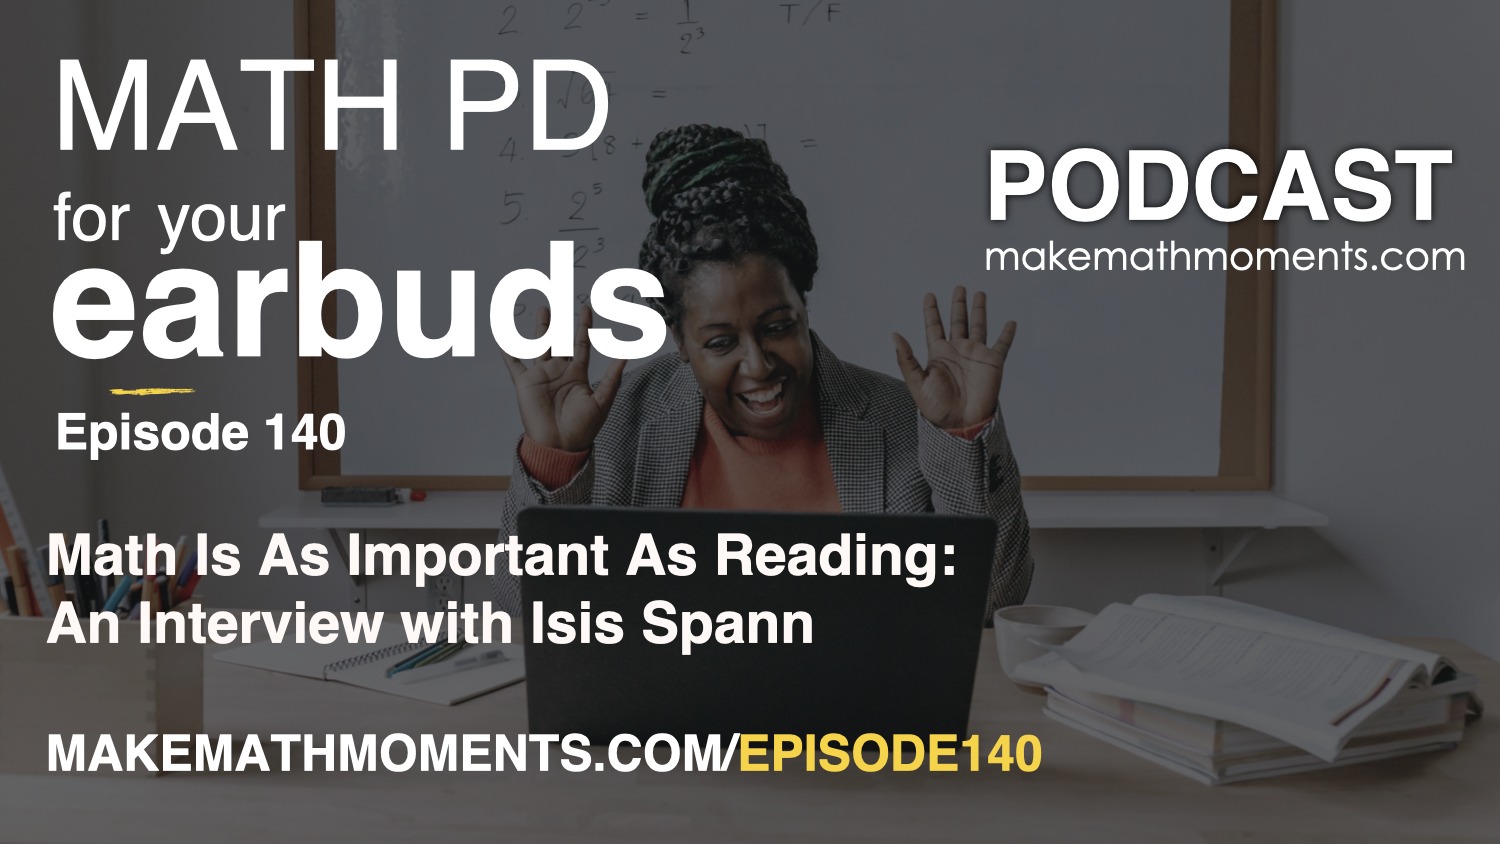 Episode 140: Math Is As Important As Reading: An Interview with Isis Spann